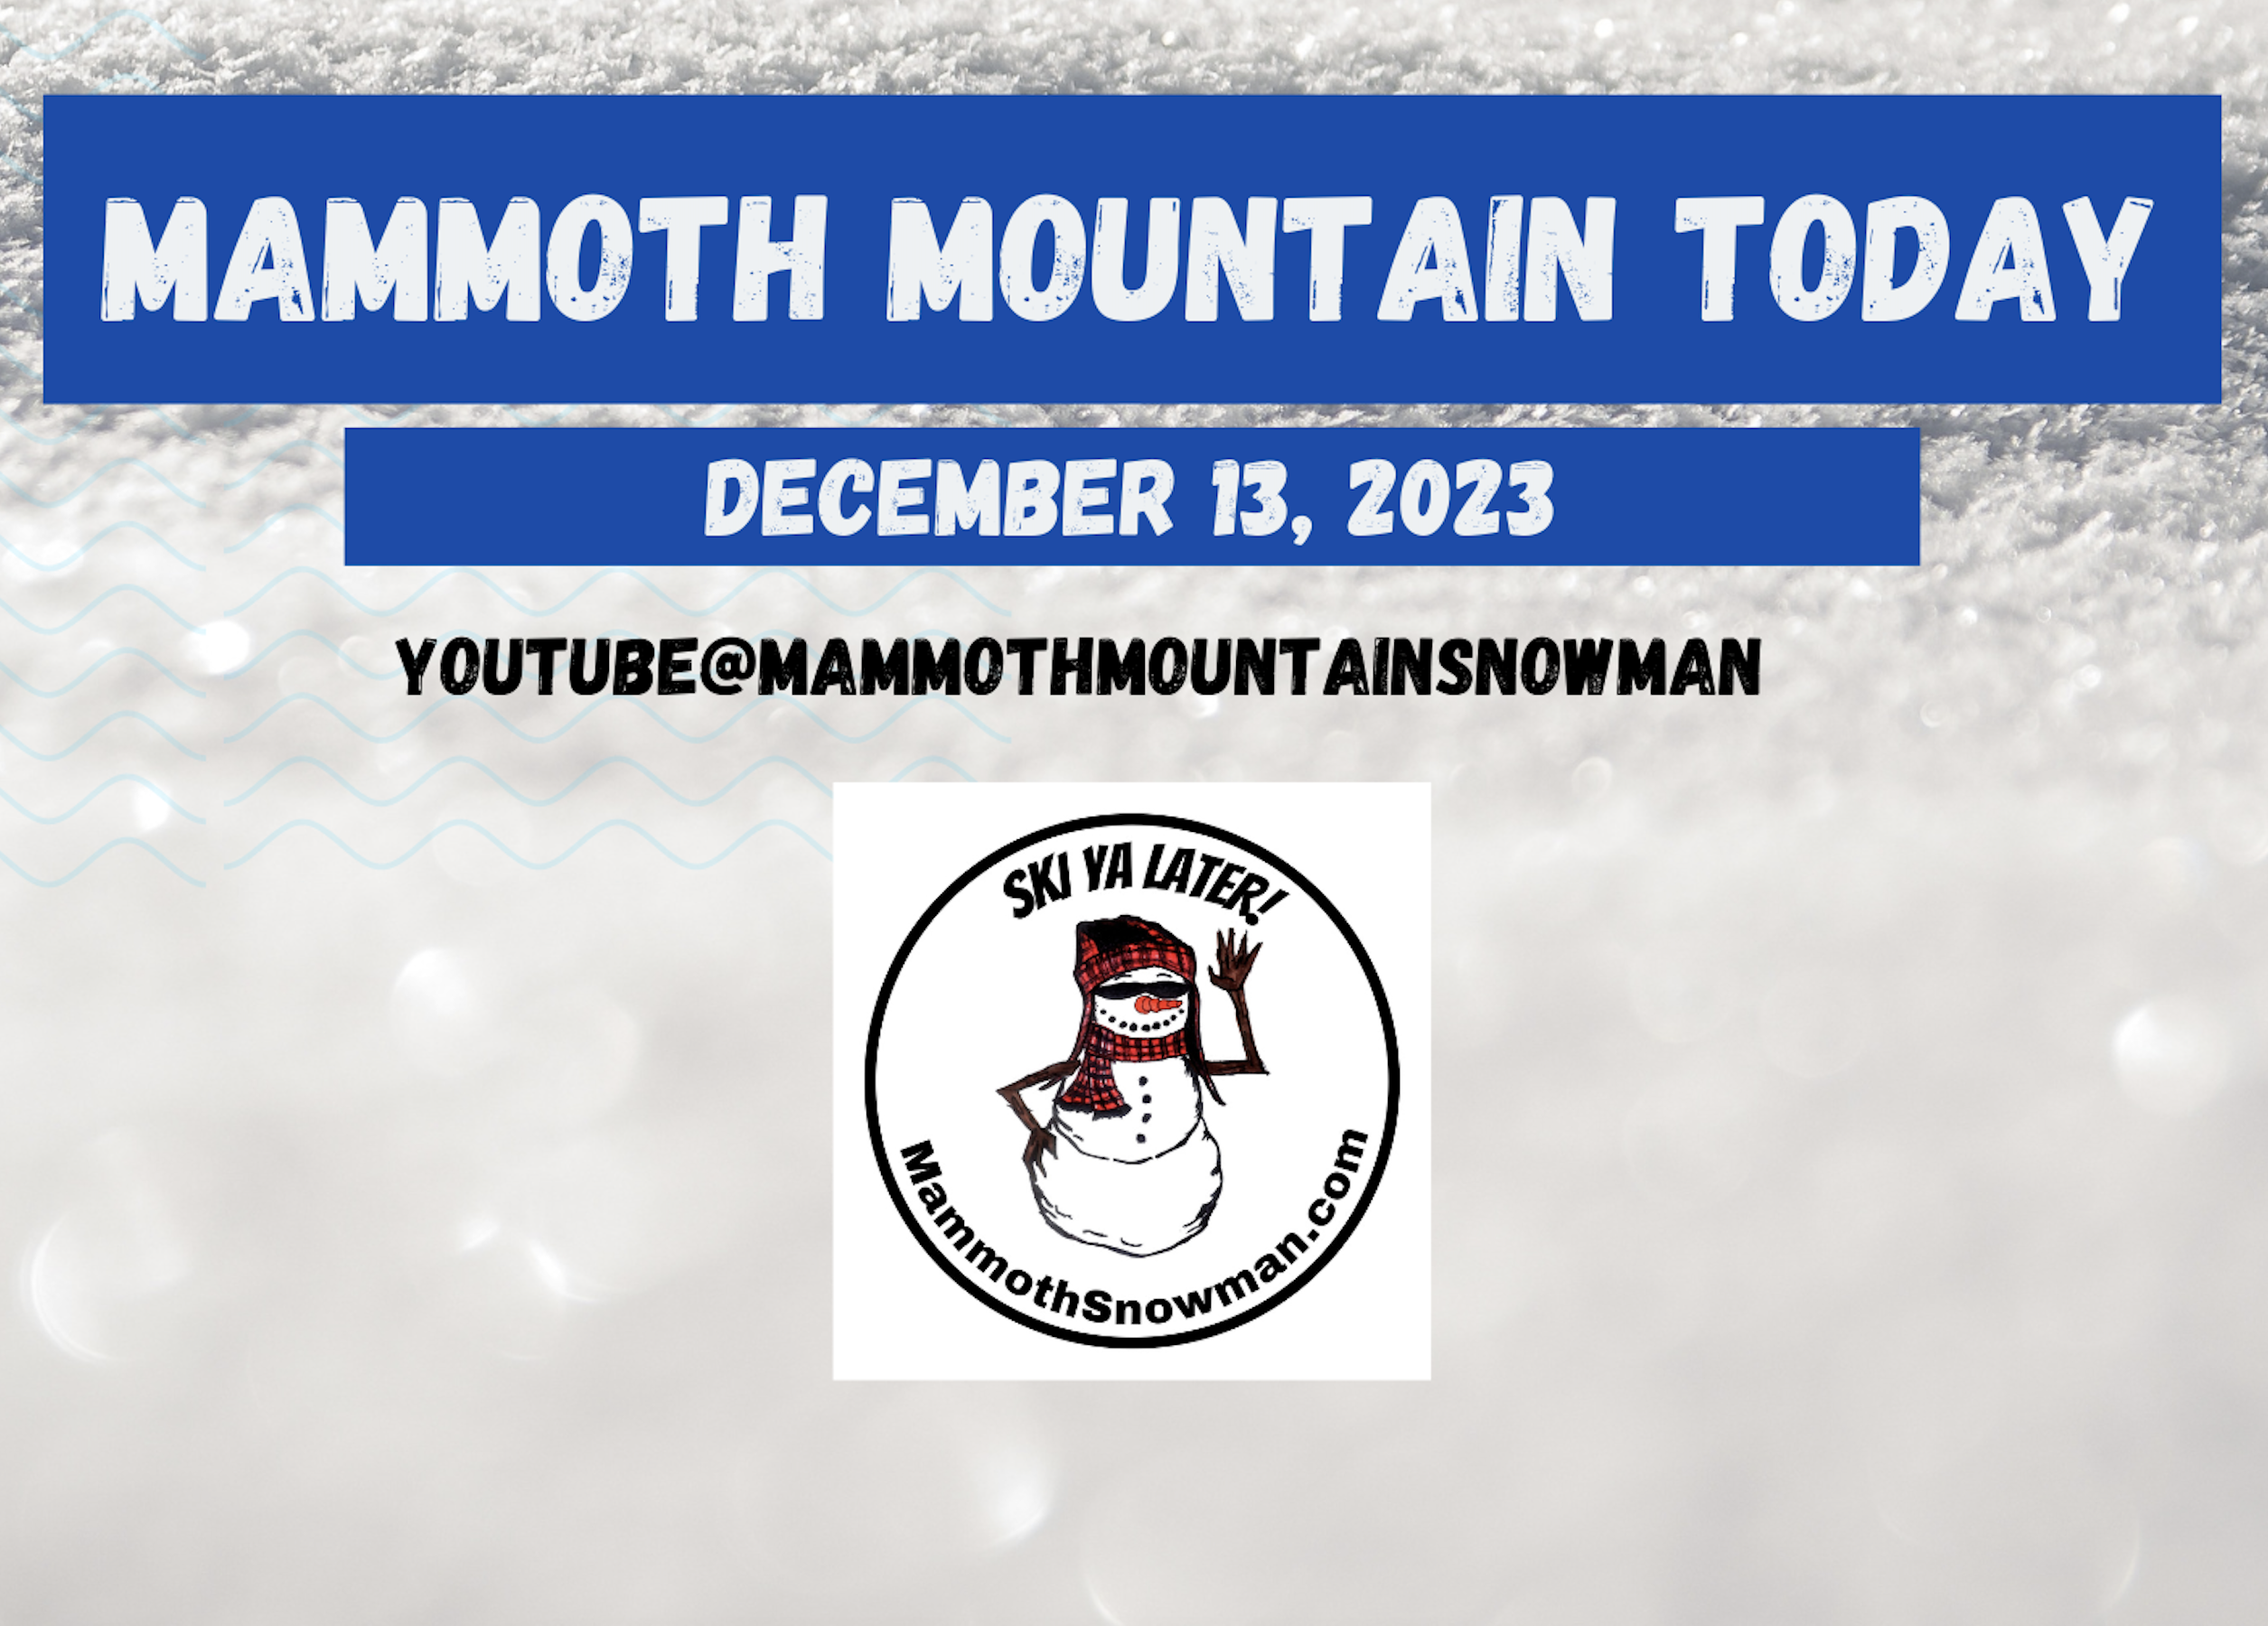 Mammoth Mountain Today Video